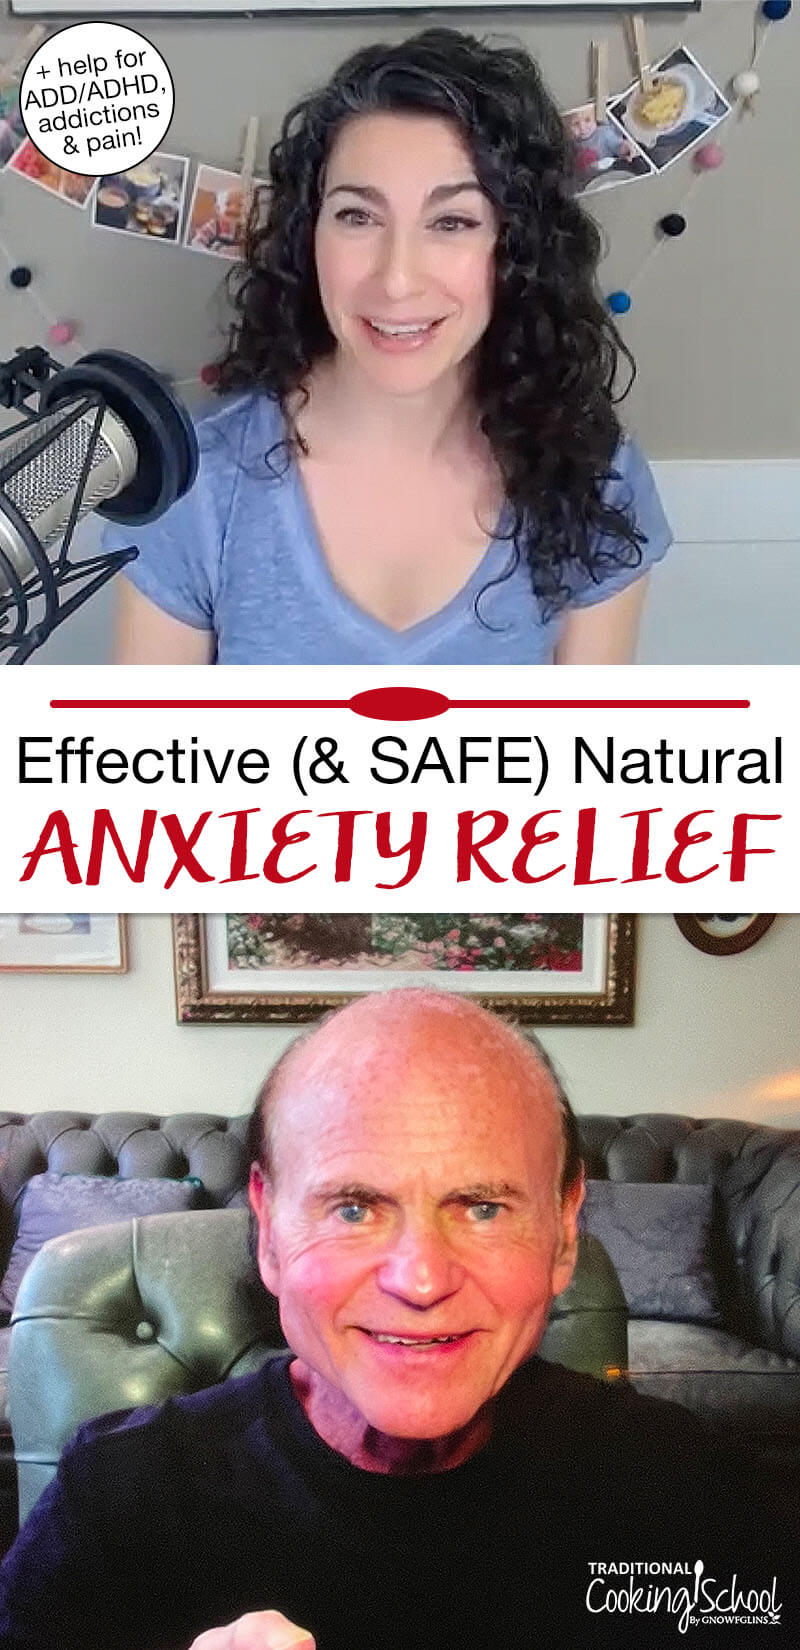 Photo collage of a smiling woman interviewing Dr. Steven Crain. Text overlay says: "Effective (& Safe) Natural Anxiety Relief (+help for ADD/ADHD, addictions & pain!)"